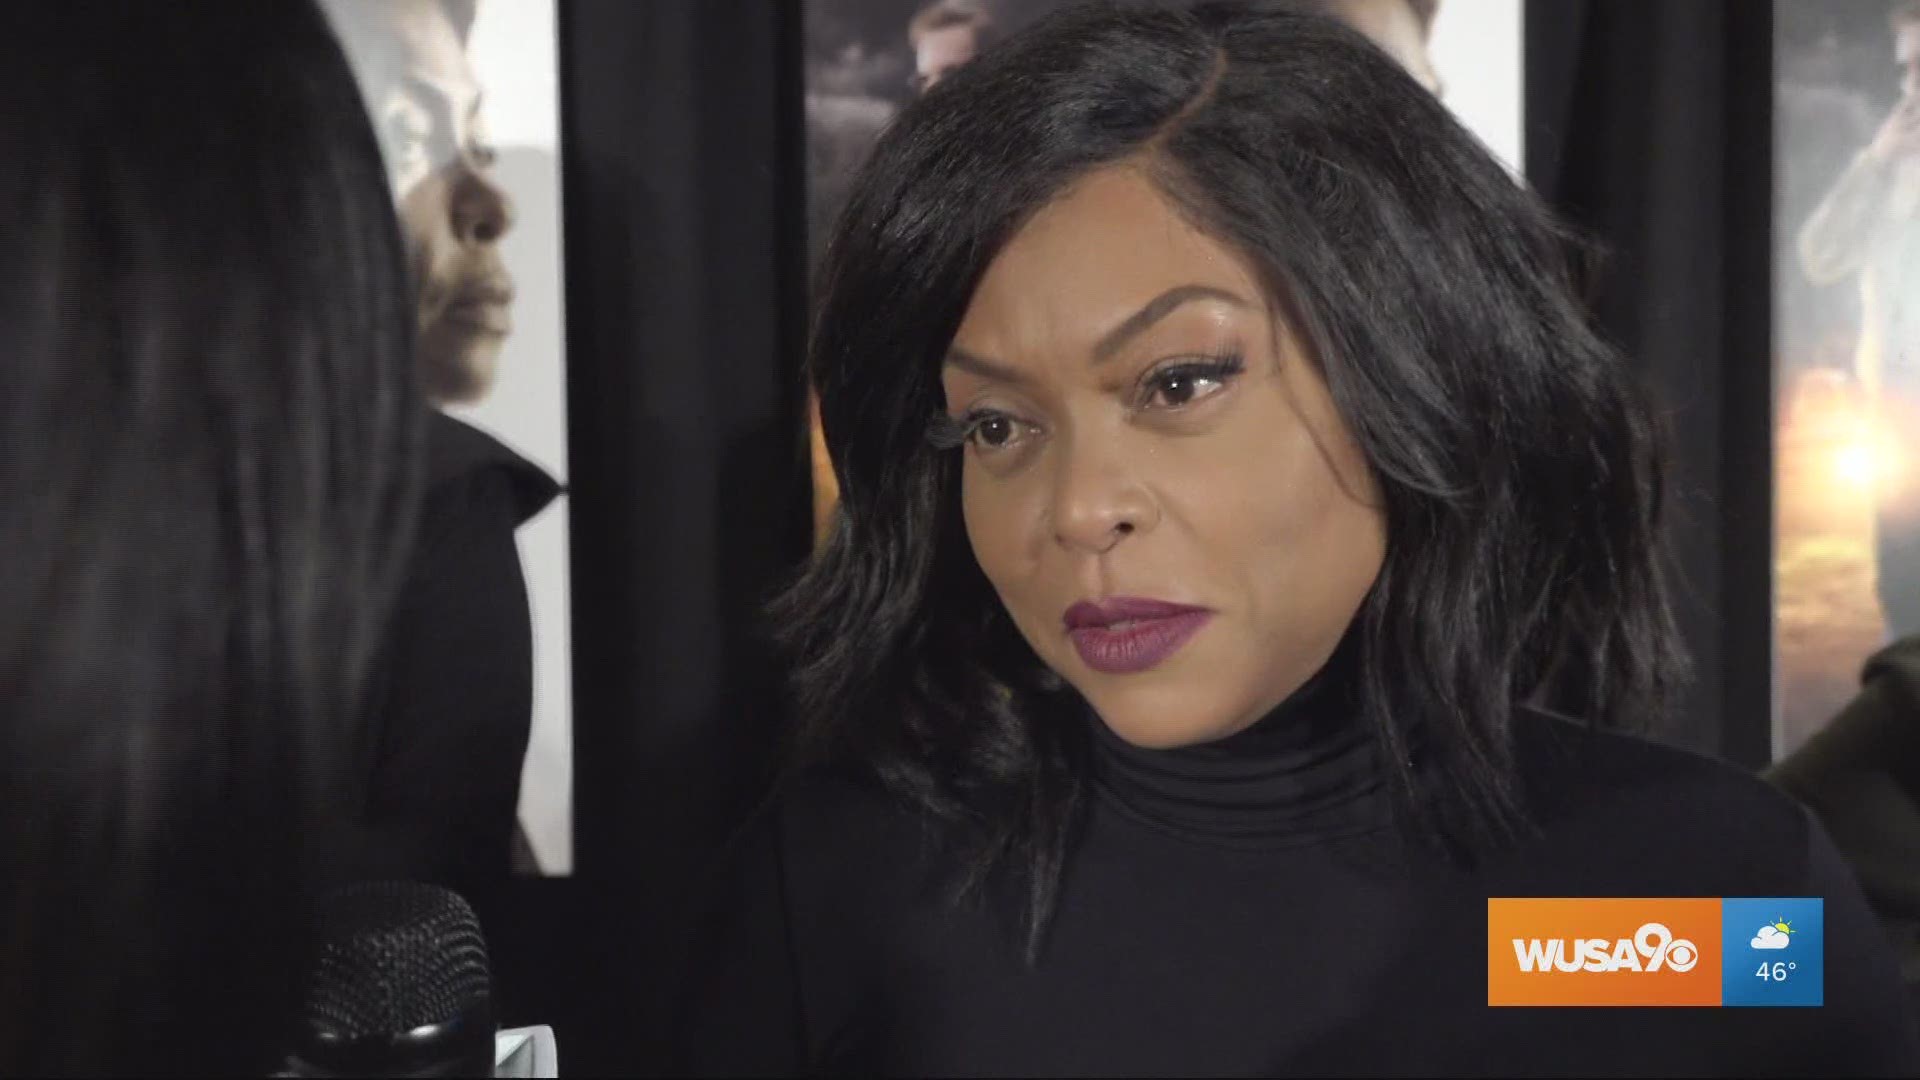 Markette caught up with Taraji P. Henson and asked her about her new movie, “The Best of Enemies” and how she and cast of “Empire” of doing. Markette, Kristen and comedian Justin Hires (Macgyver, CBS) respond on the couch.